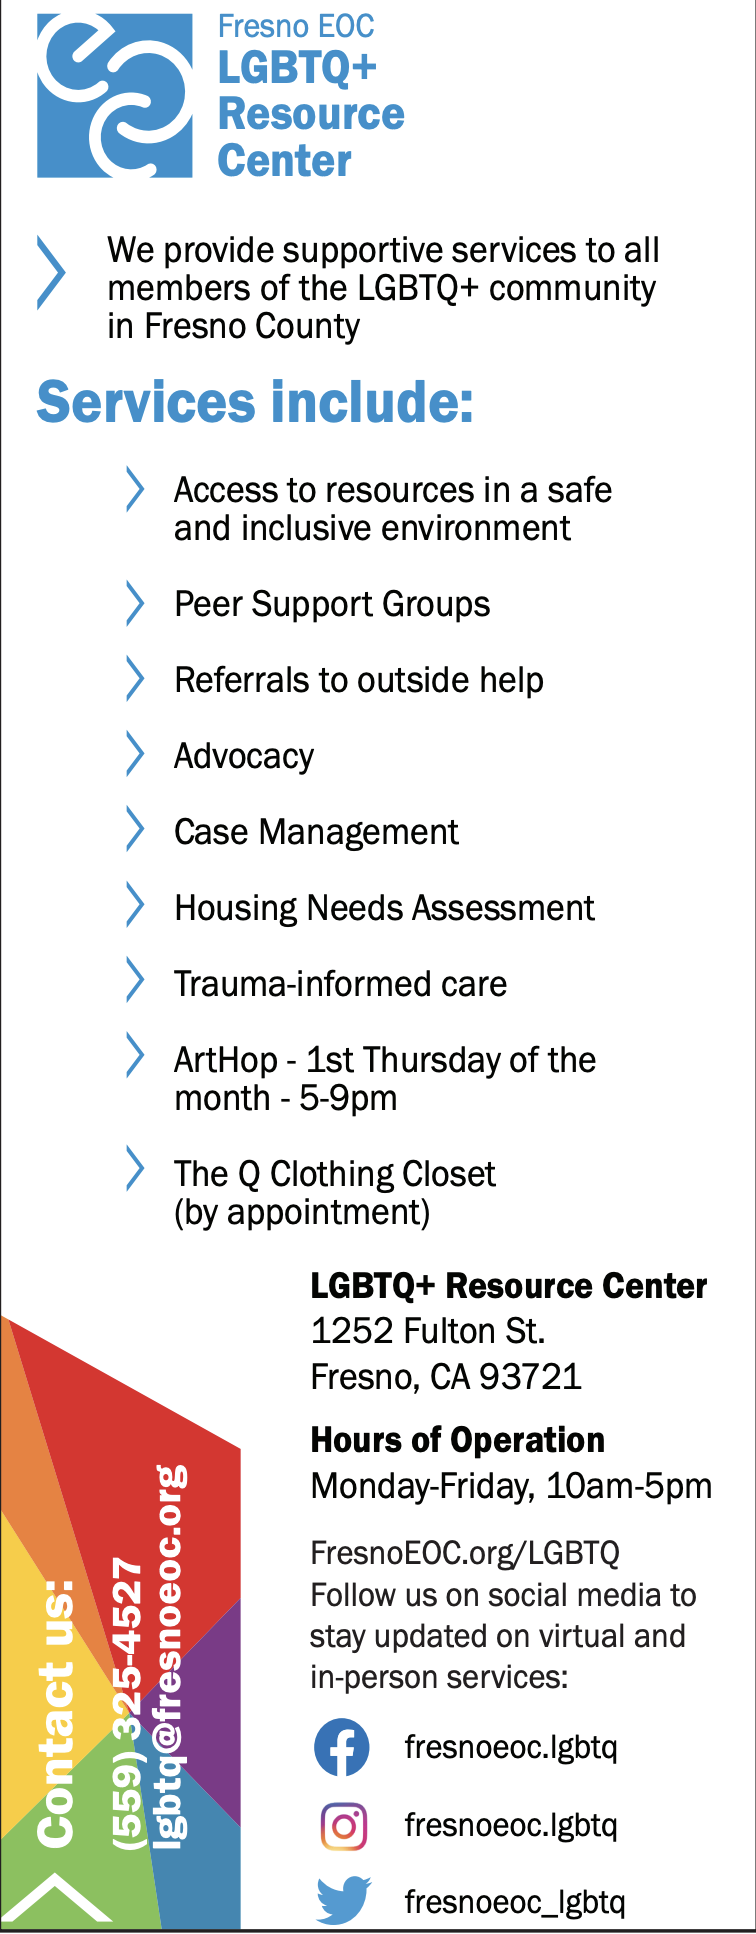 LGBTQ+ support information call +1 559.325.4527 for more information